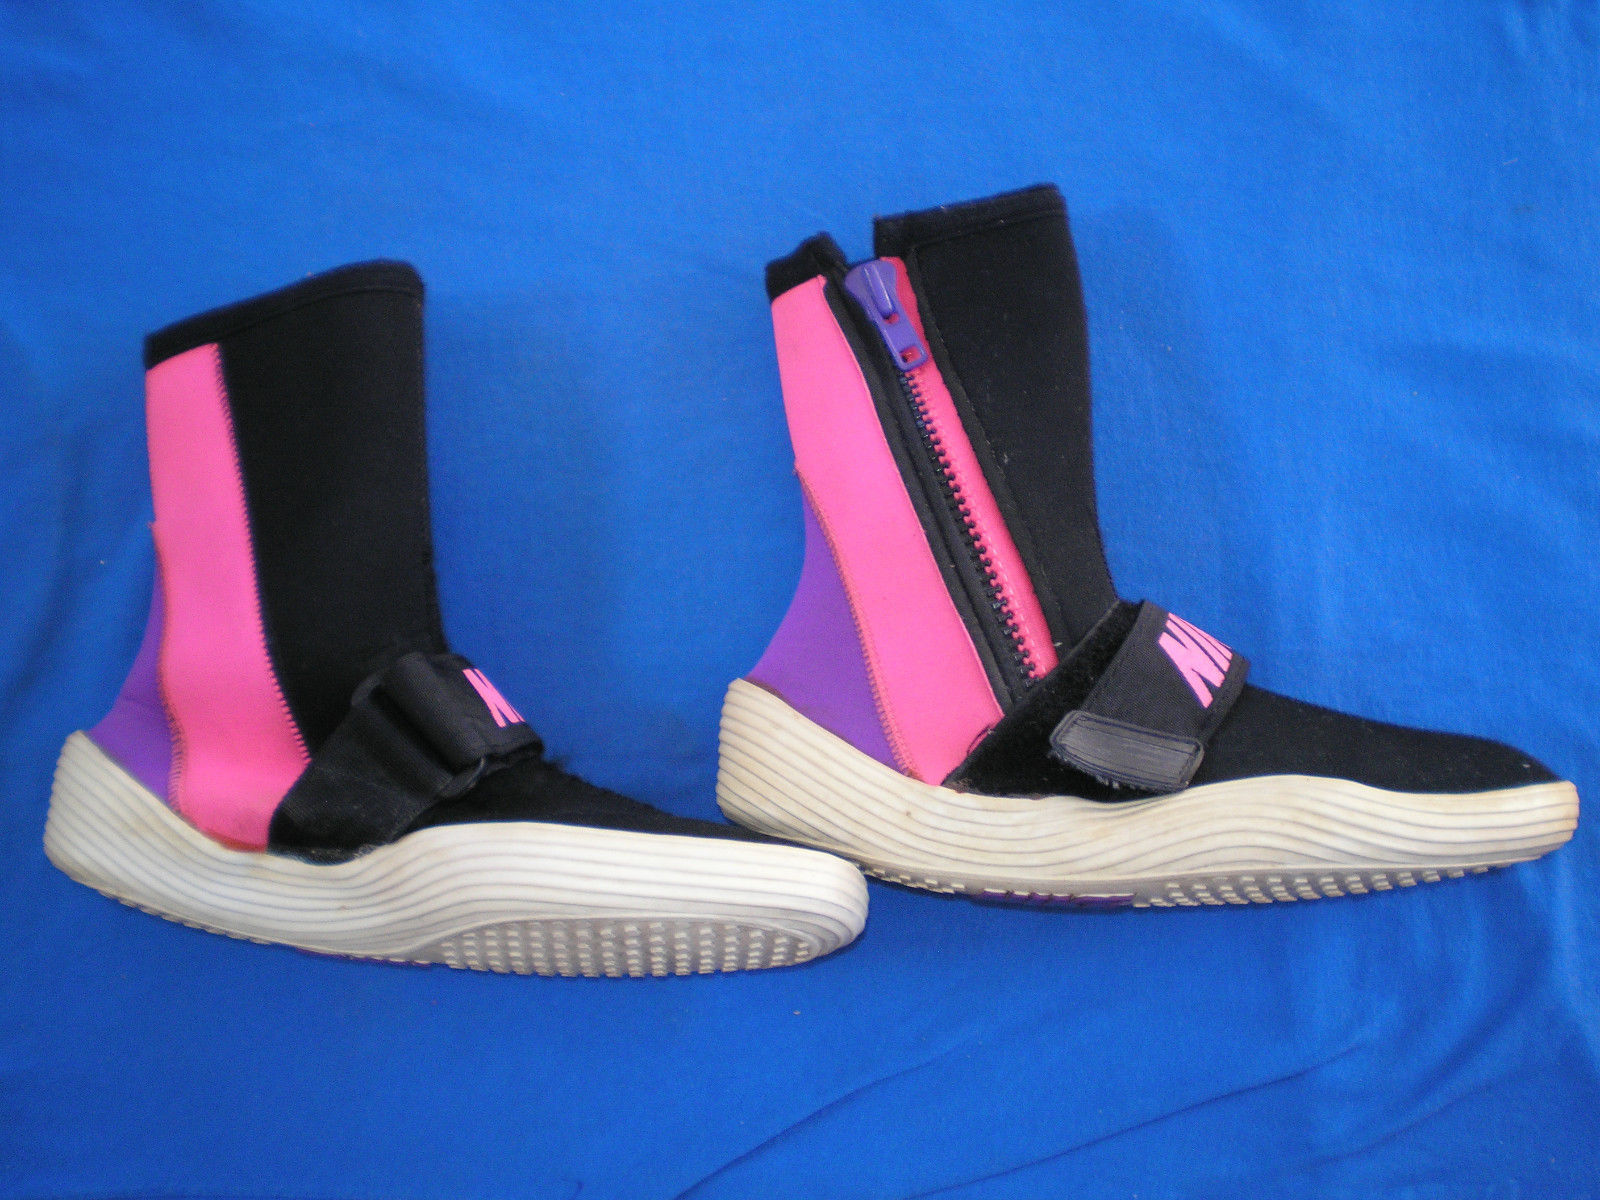 yeezy water shoes